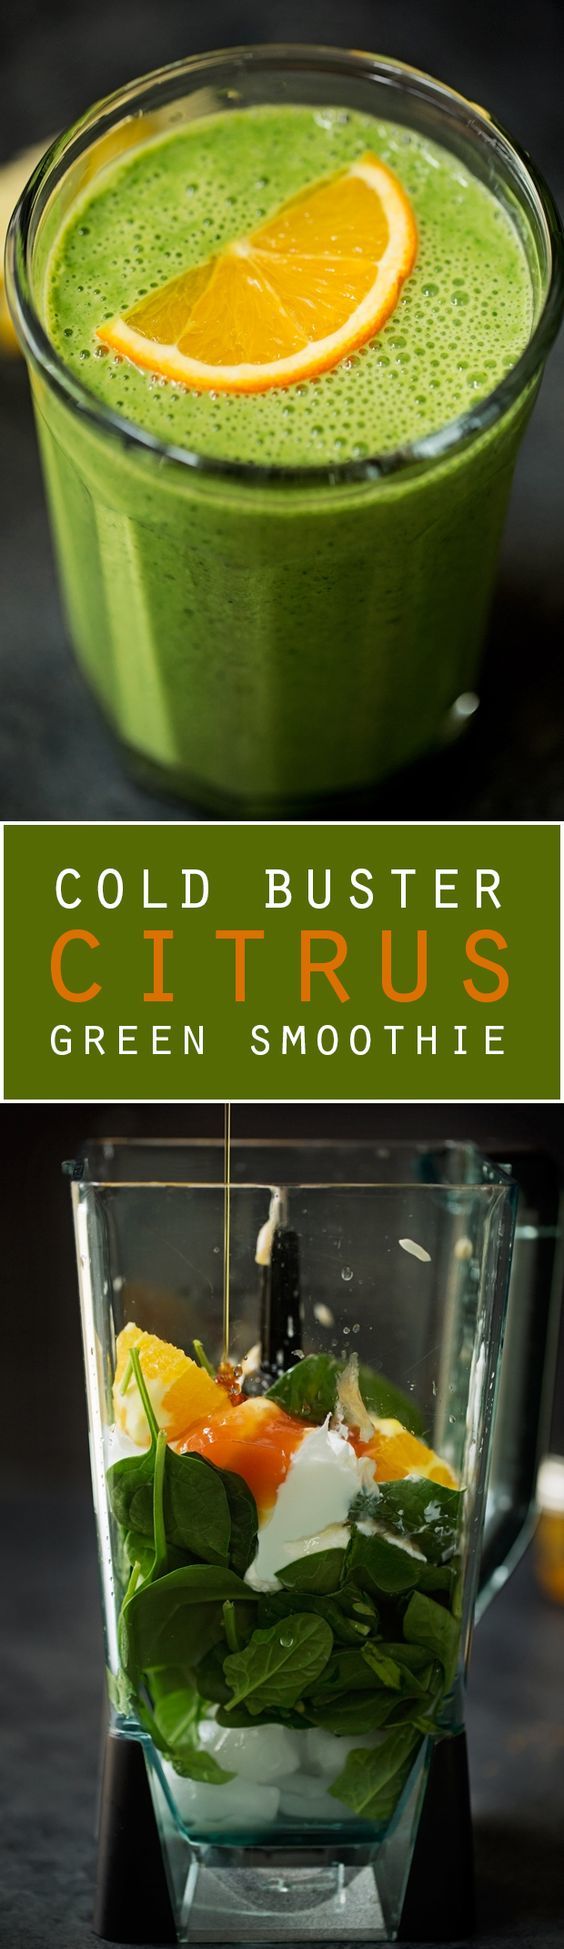 Learn how green smoothie recipes can protect you from colds. | sugar free smoothie recipes | healthiest green smoothie | 21 day green smoothie detox | green smoothie benefits #health #wellness #keepingfit #healthyrecipes #organic #healthylife #healthymeals #diets #health